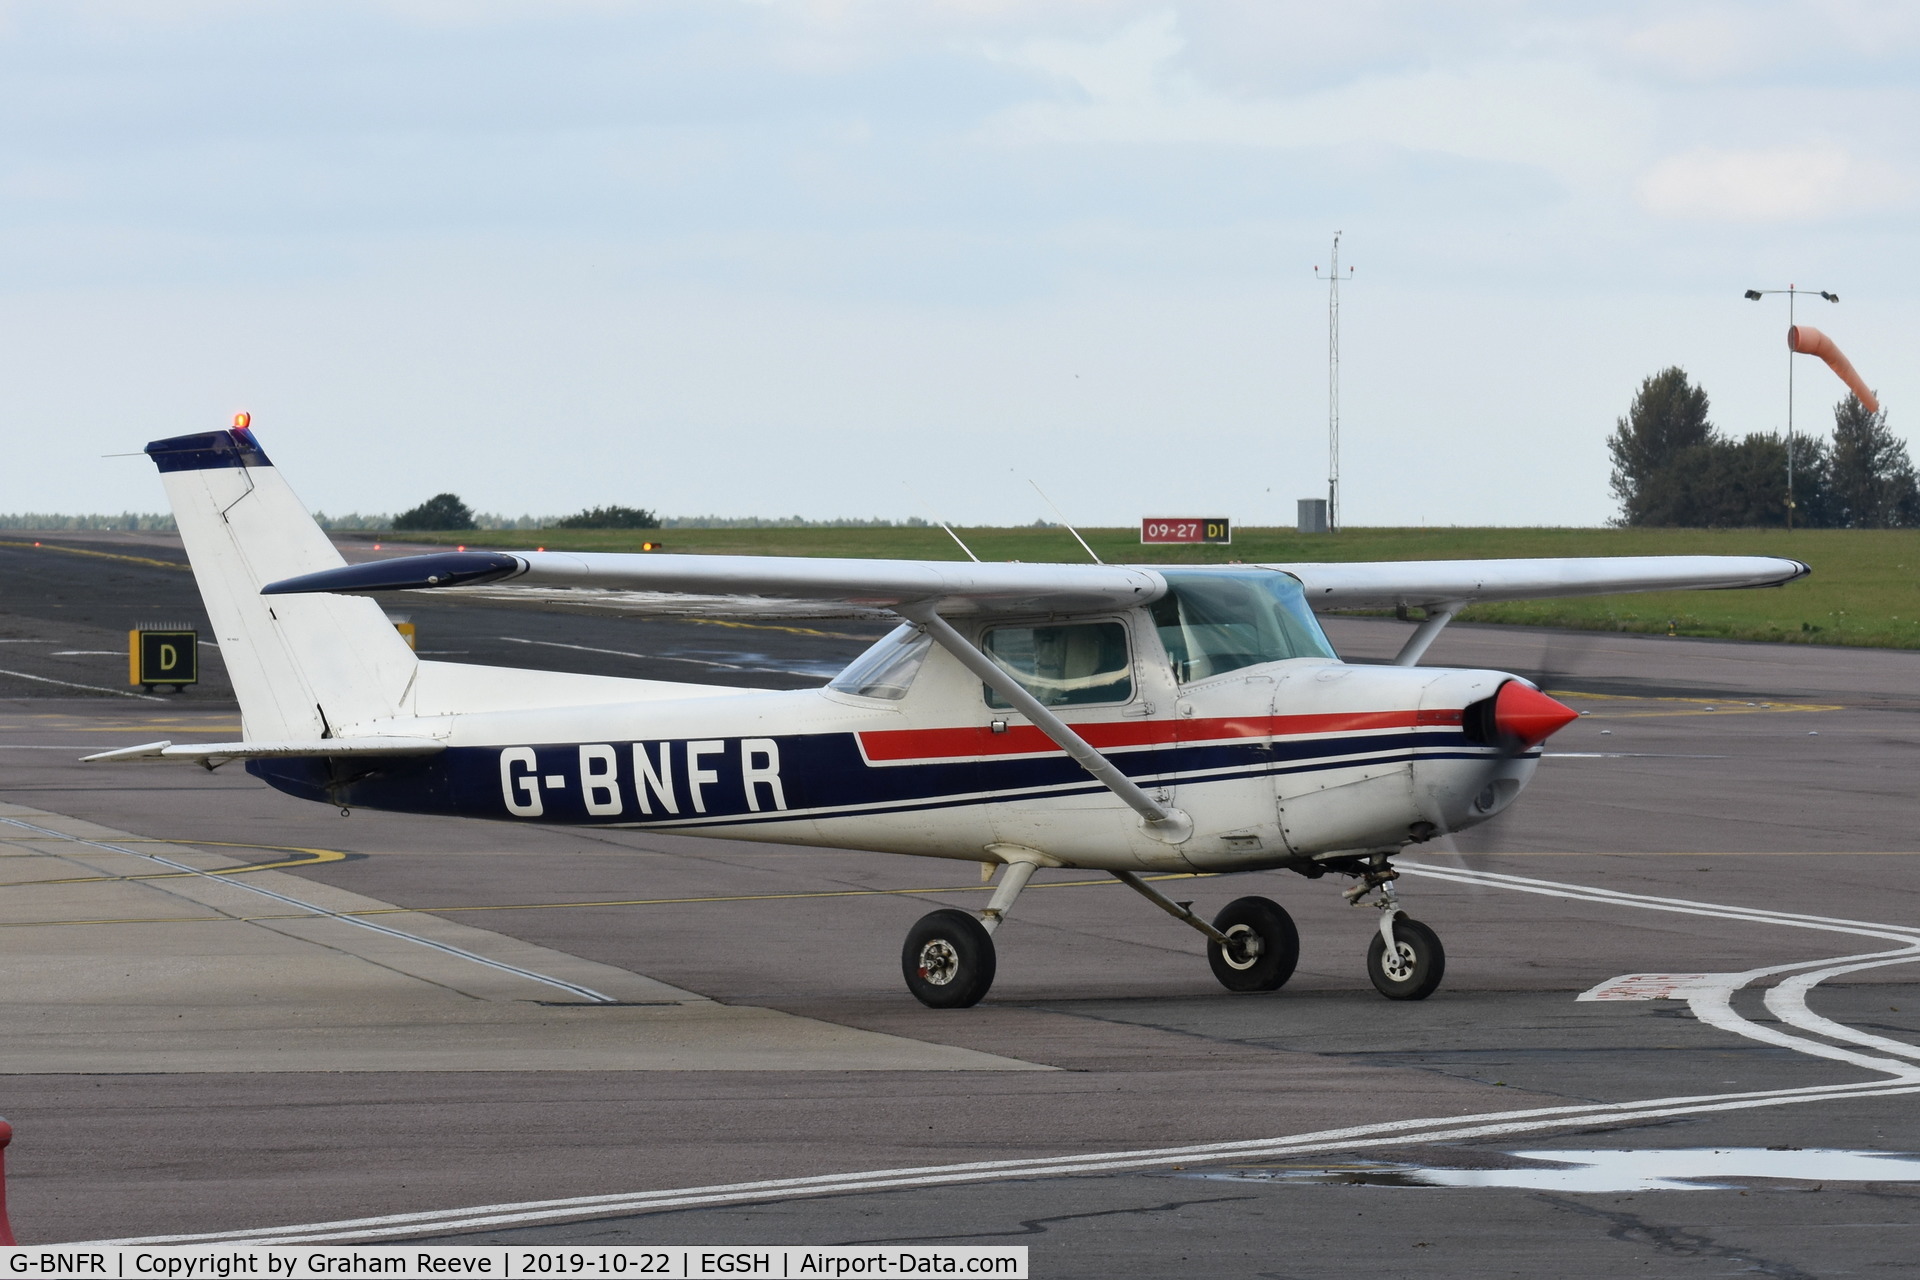 G-BNFR, 1978 Cessna 152 C/N 15282035, Departing from Norwich.